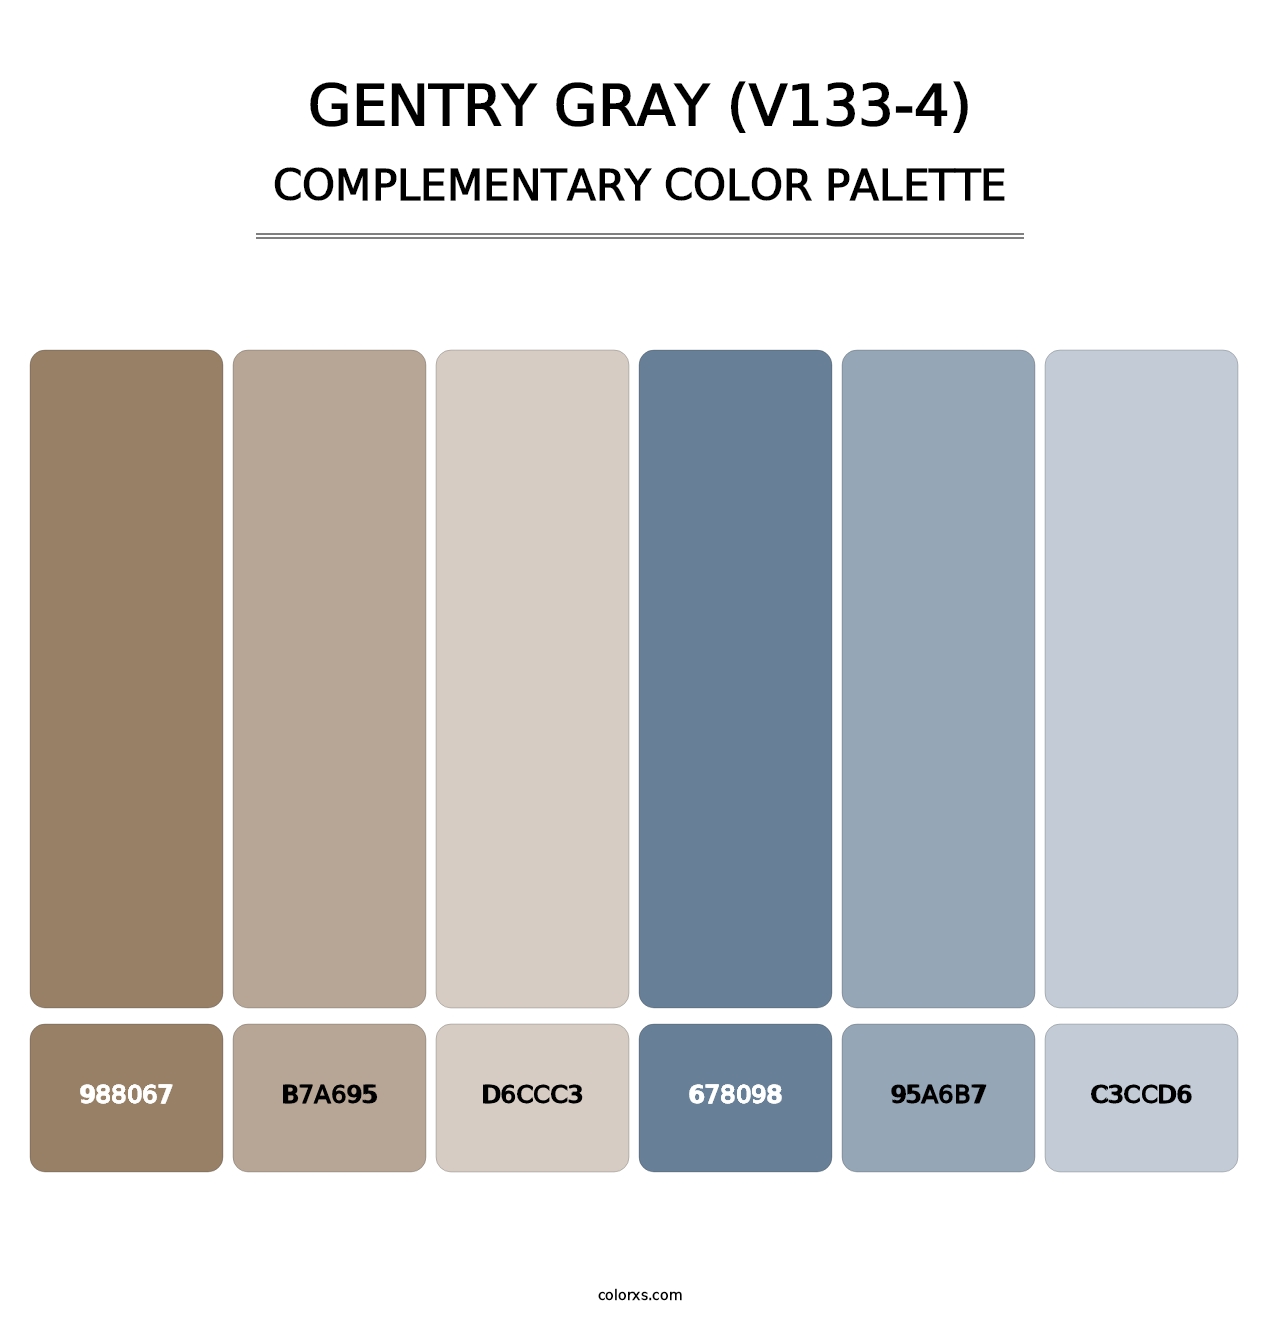 Gentry Gray (V133-4) - Complementary Color Palette